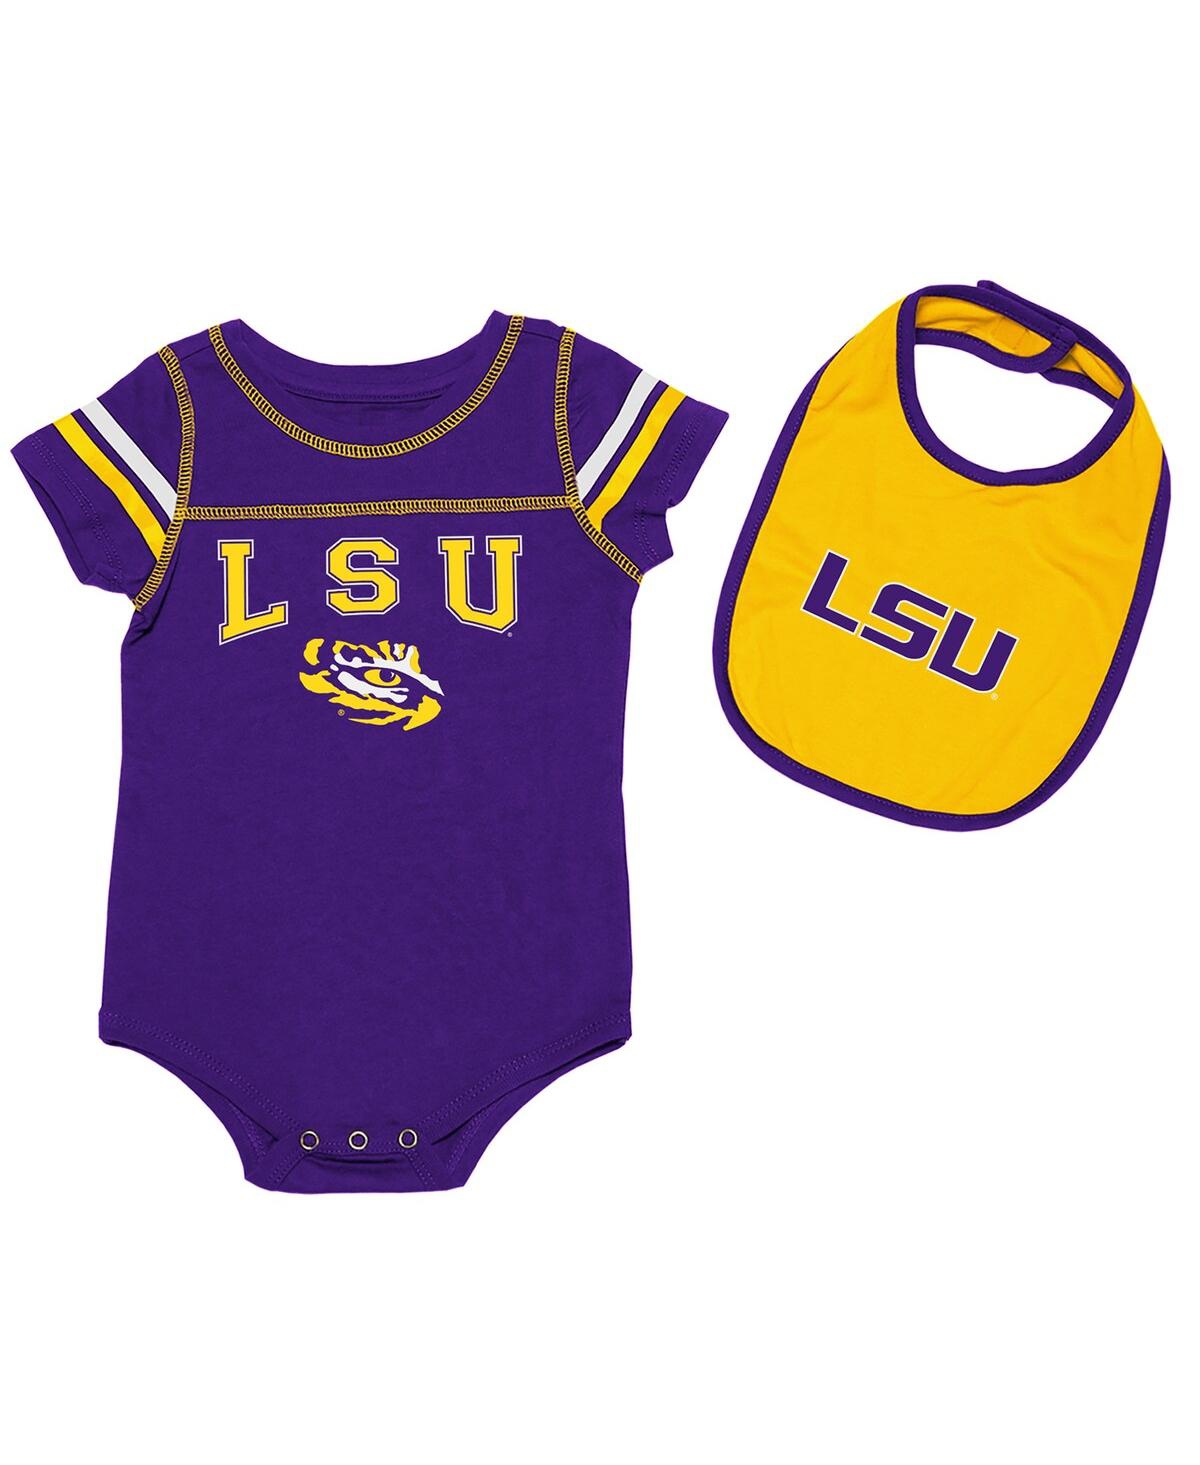 Colosseum Babies' Newborn And Infant Boys And Girls  Purple, Gold Lsu Tigers Chocolate Bodysuit And Bib Set In Purple,gold